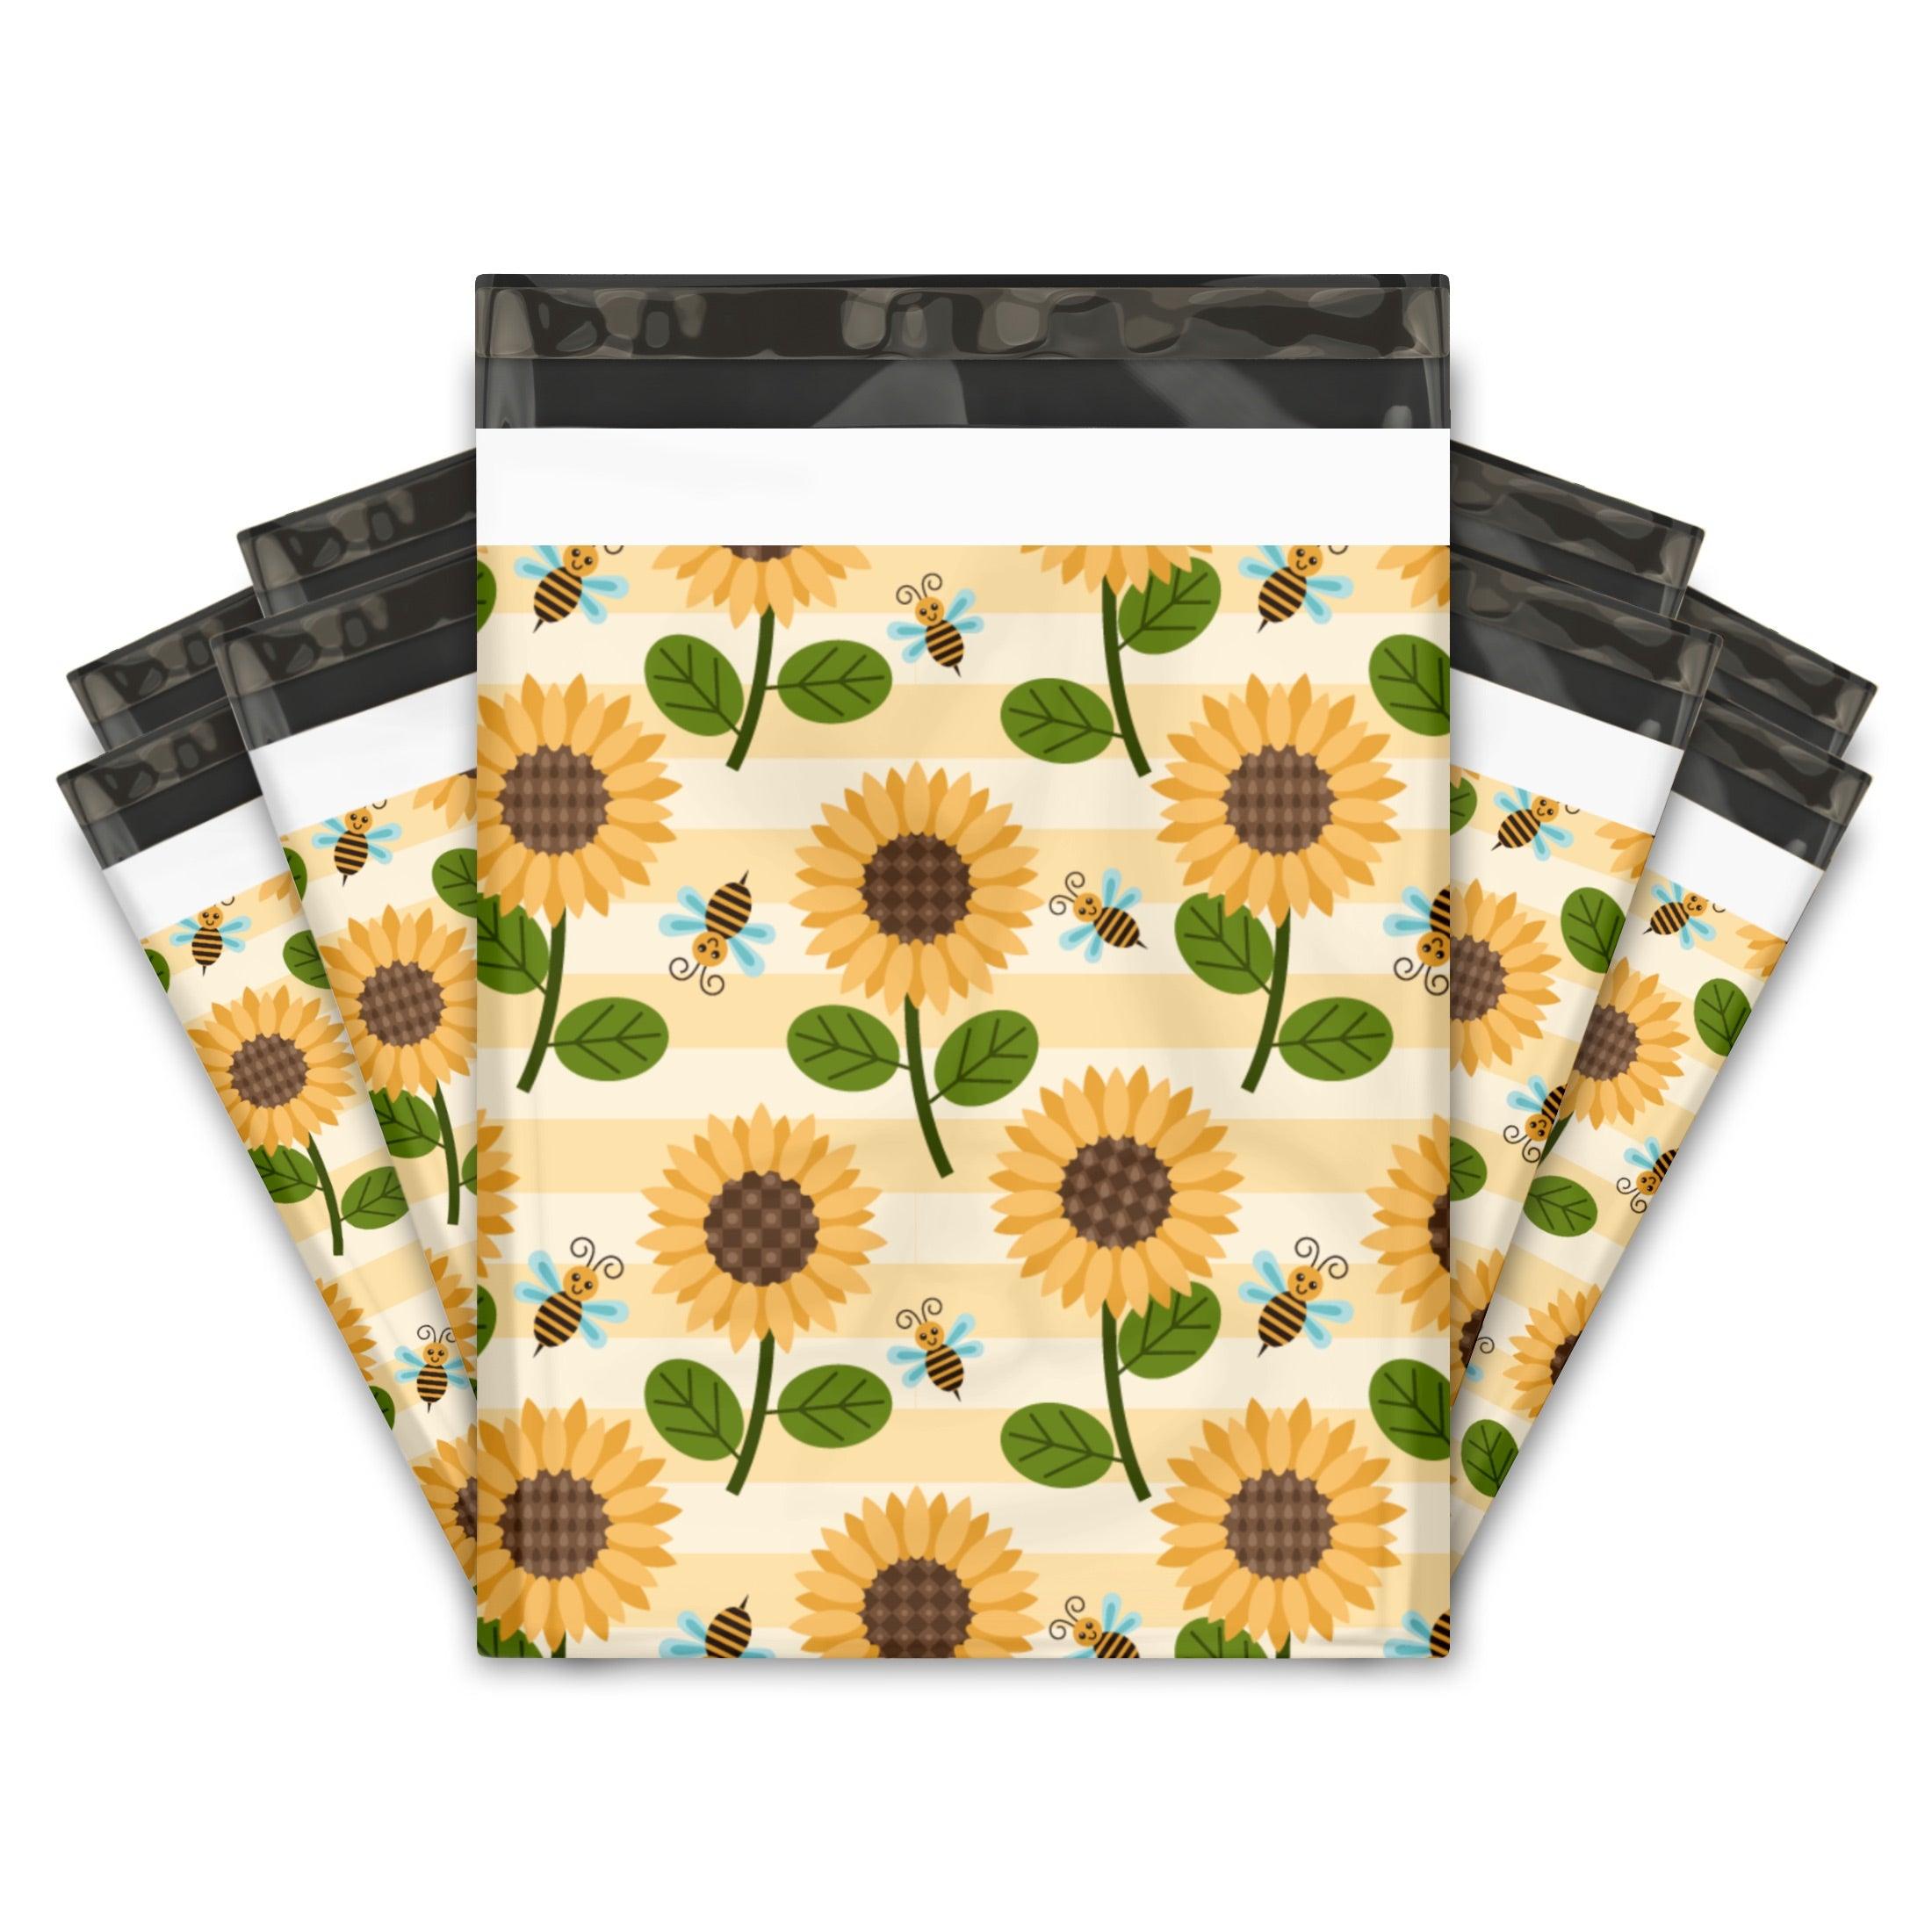 Pro Supply Global Sunflower & Bees Mailers Collection